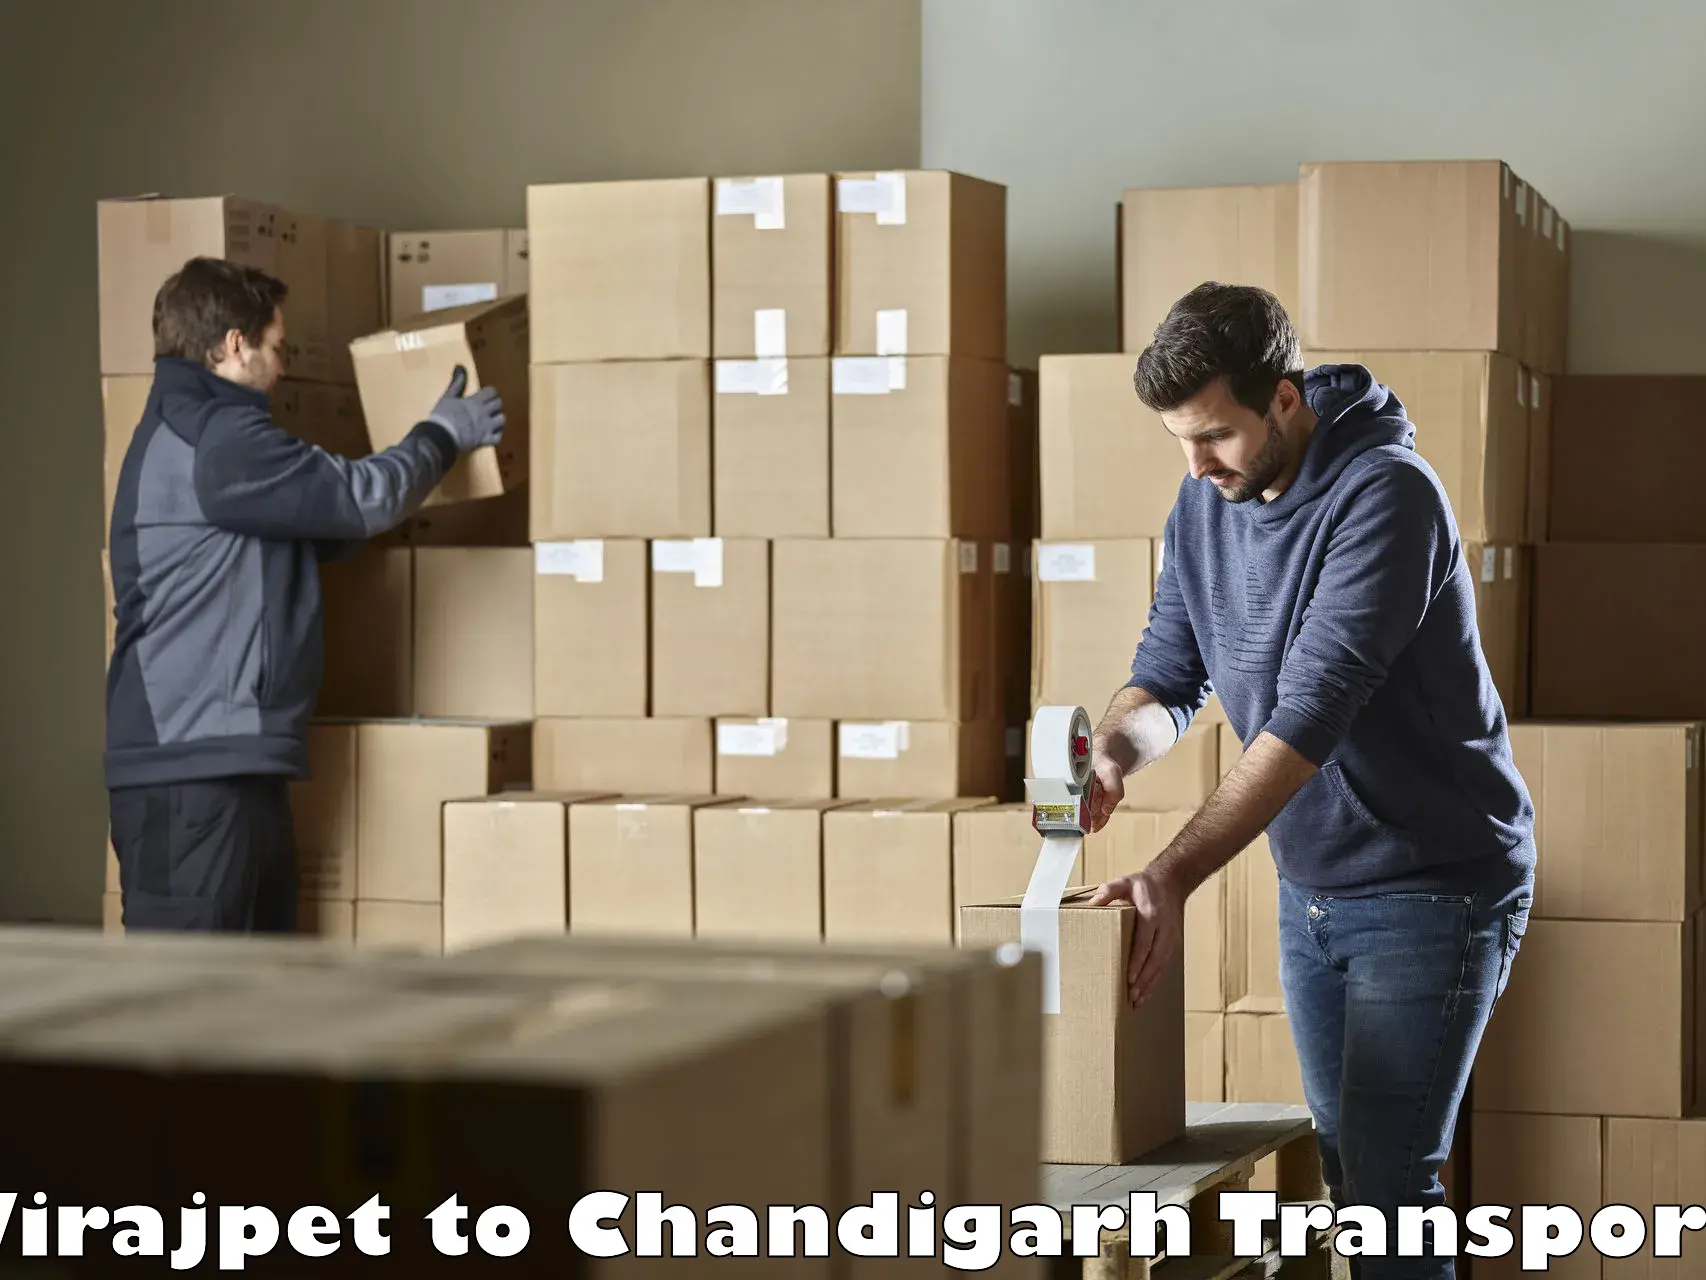 Daily parcel service transport Virajpet to Chandigarh